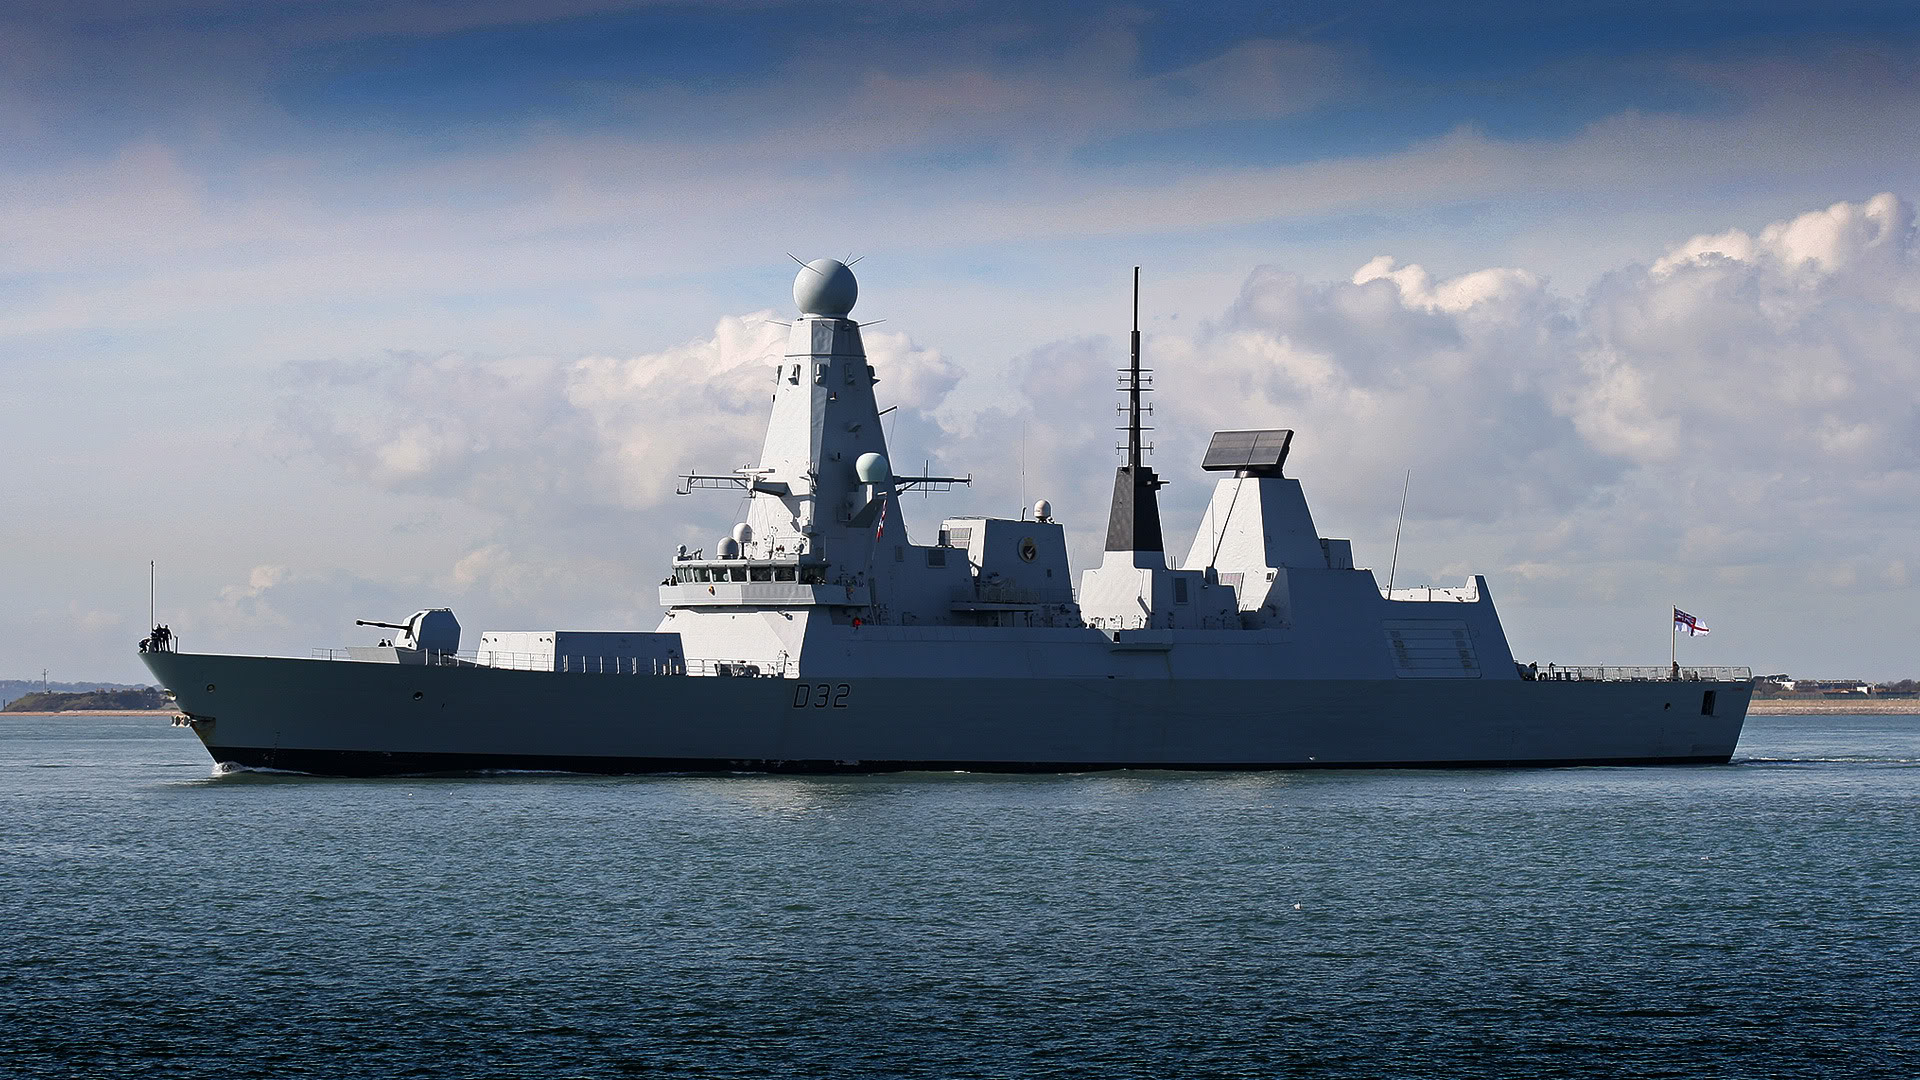 HMS Daring (D32) is a Type 45 Destroyer